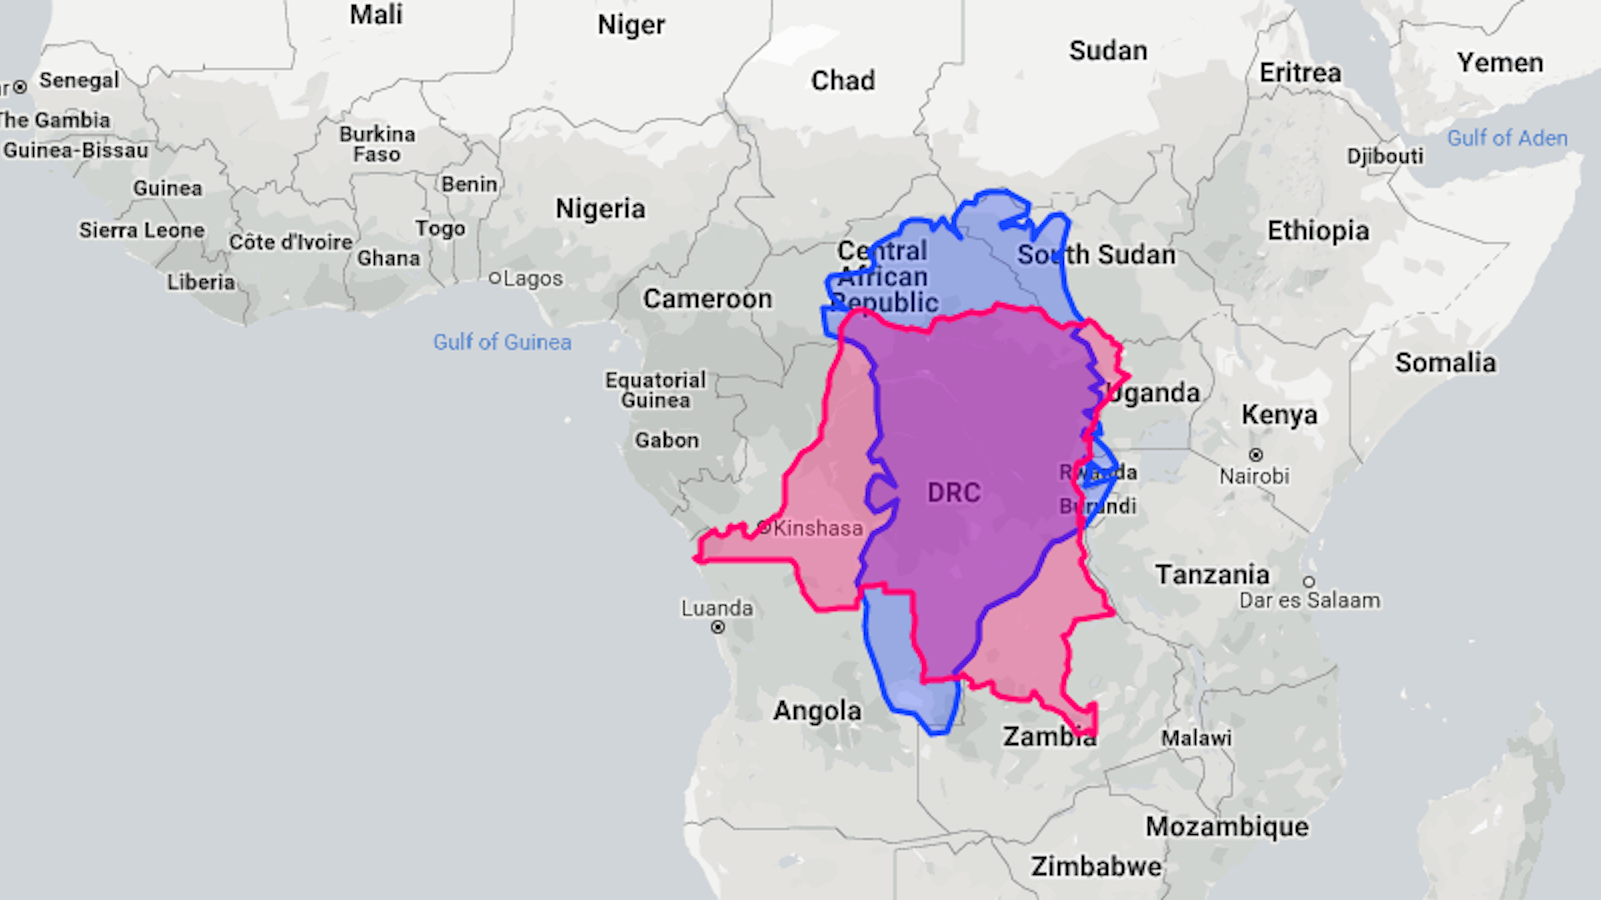 how big is ireland compared to texas